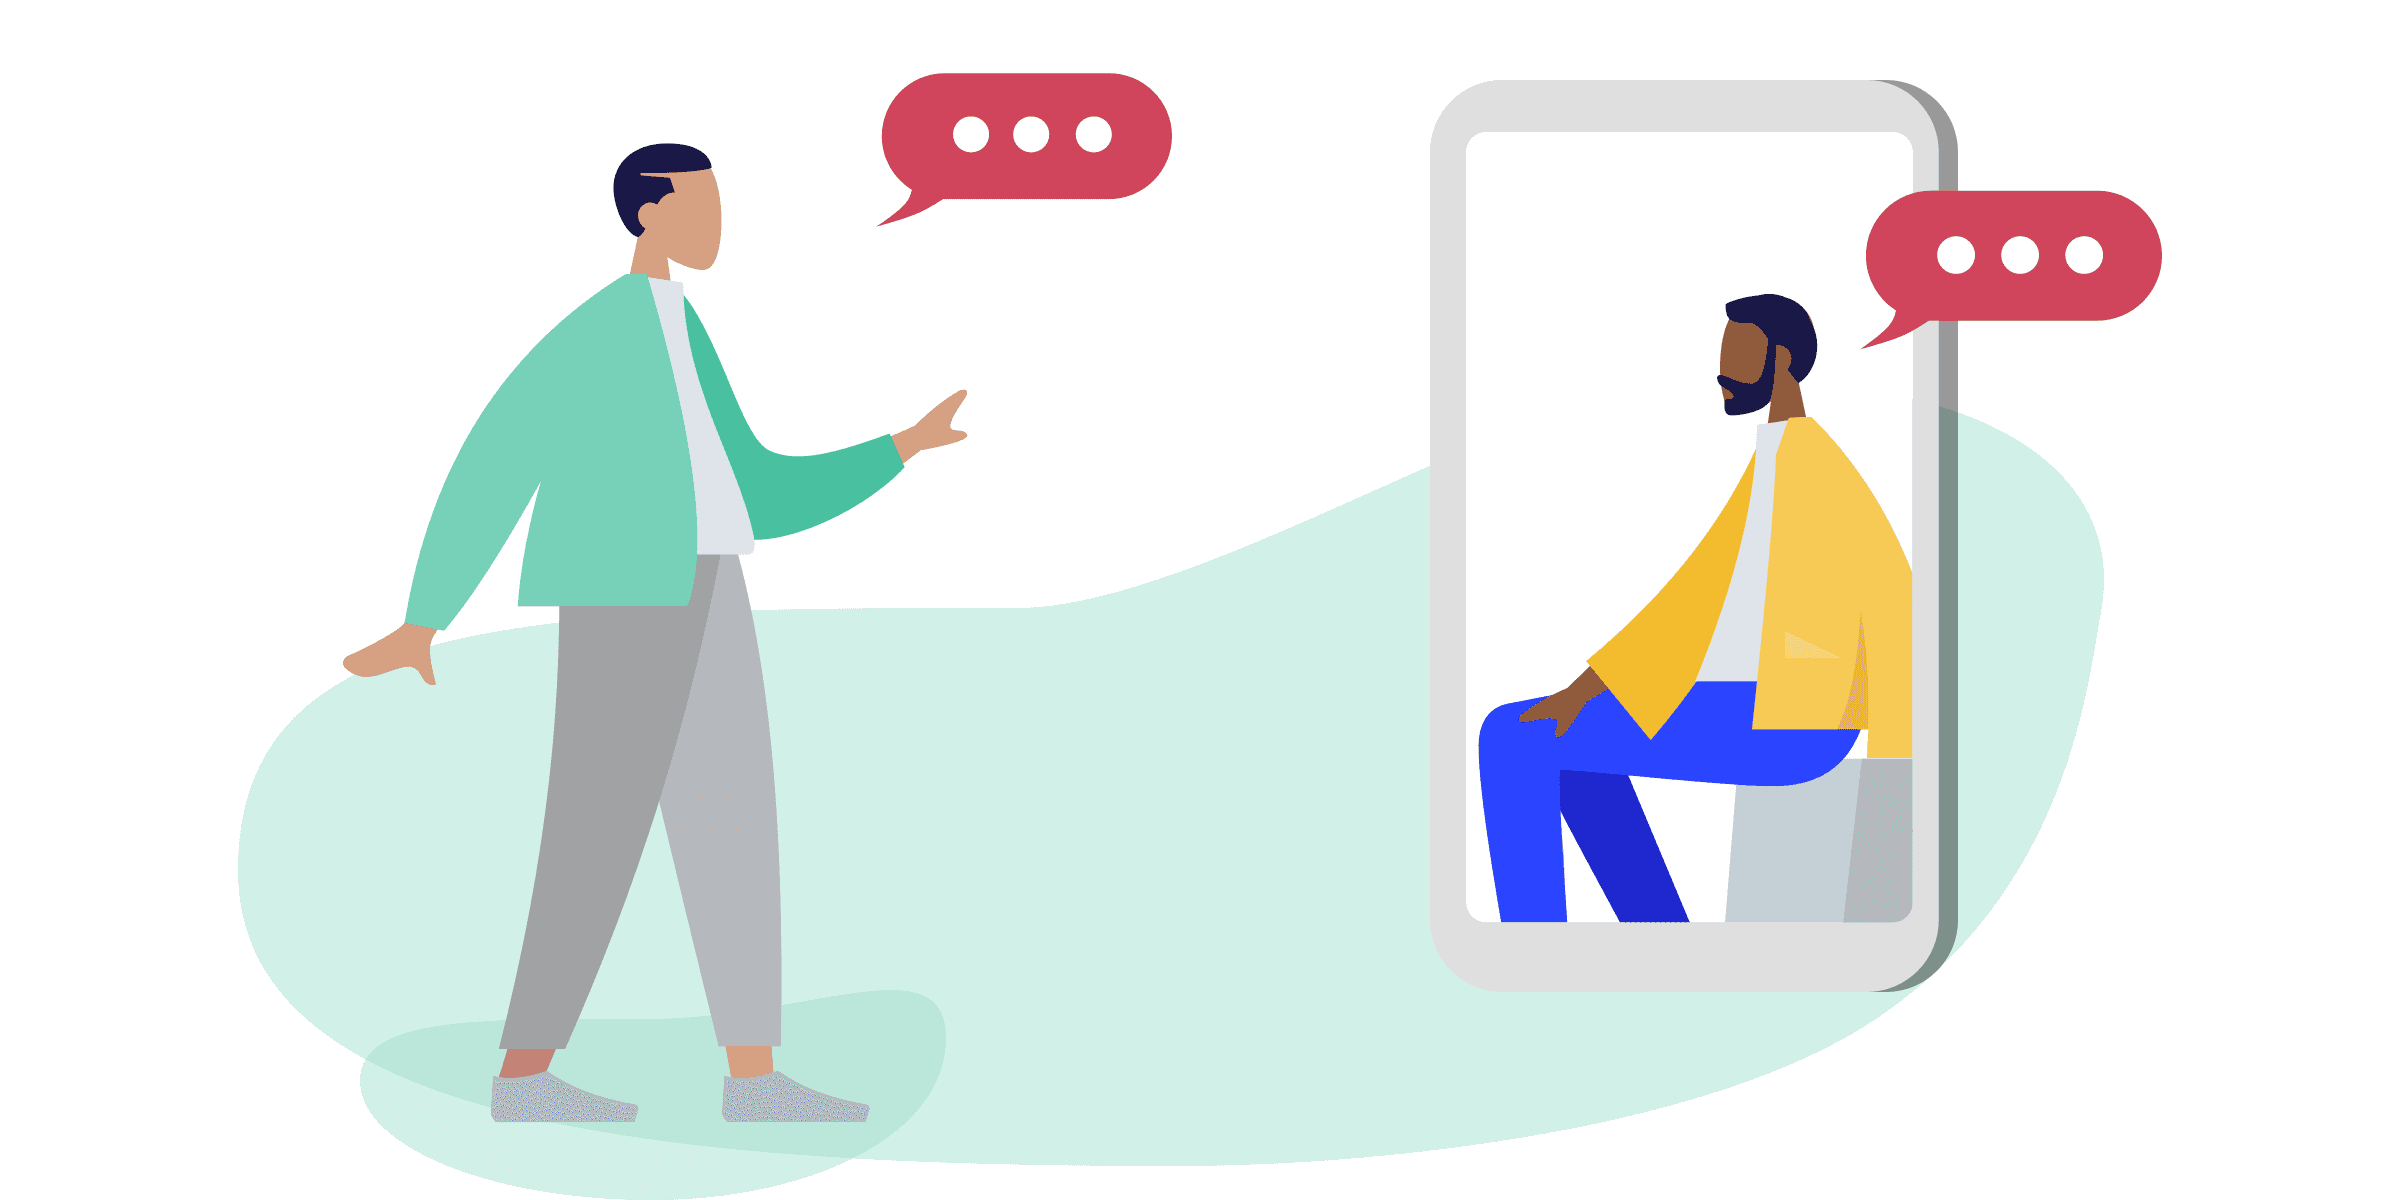 Illustration of two people talking on the phone